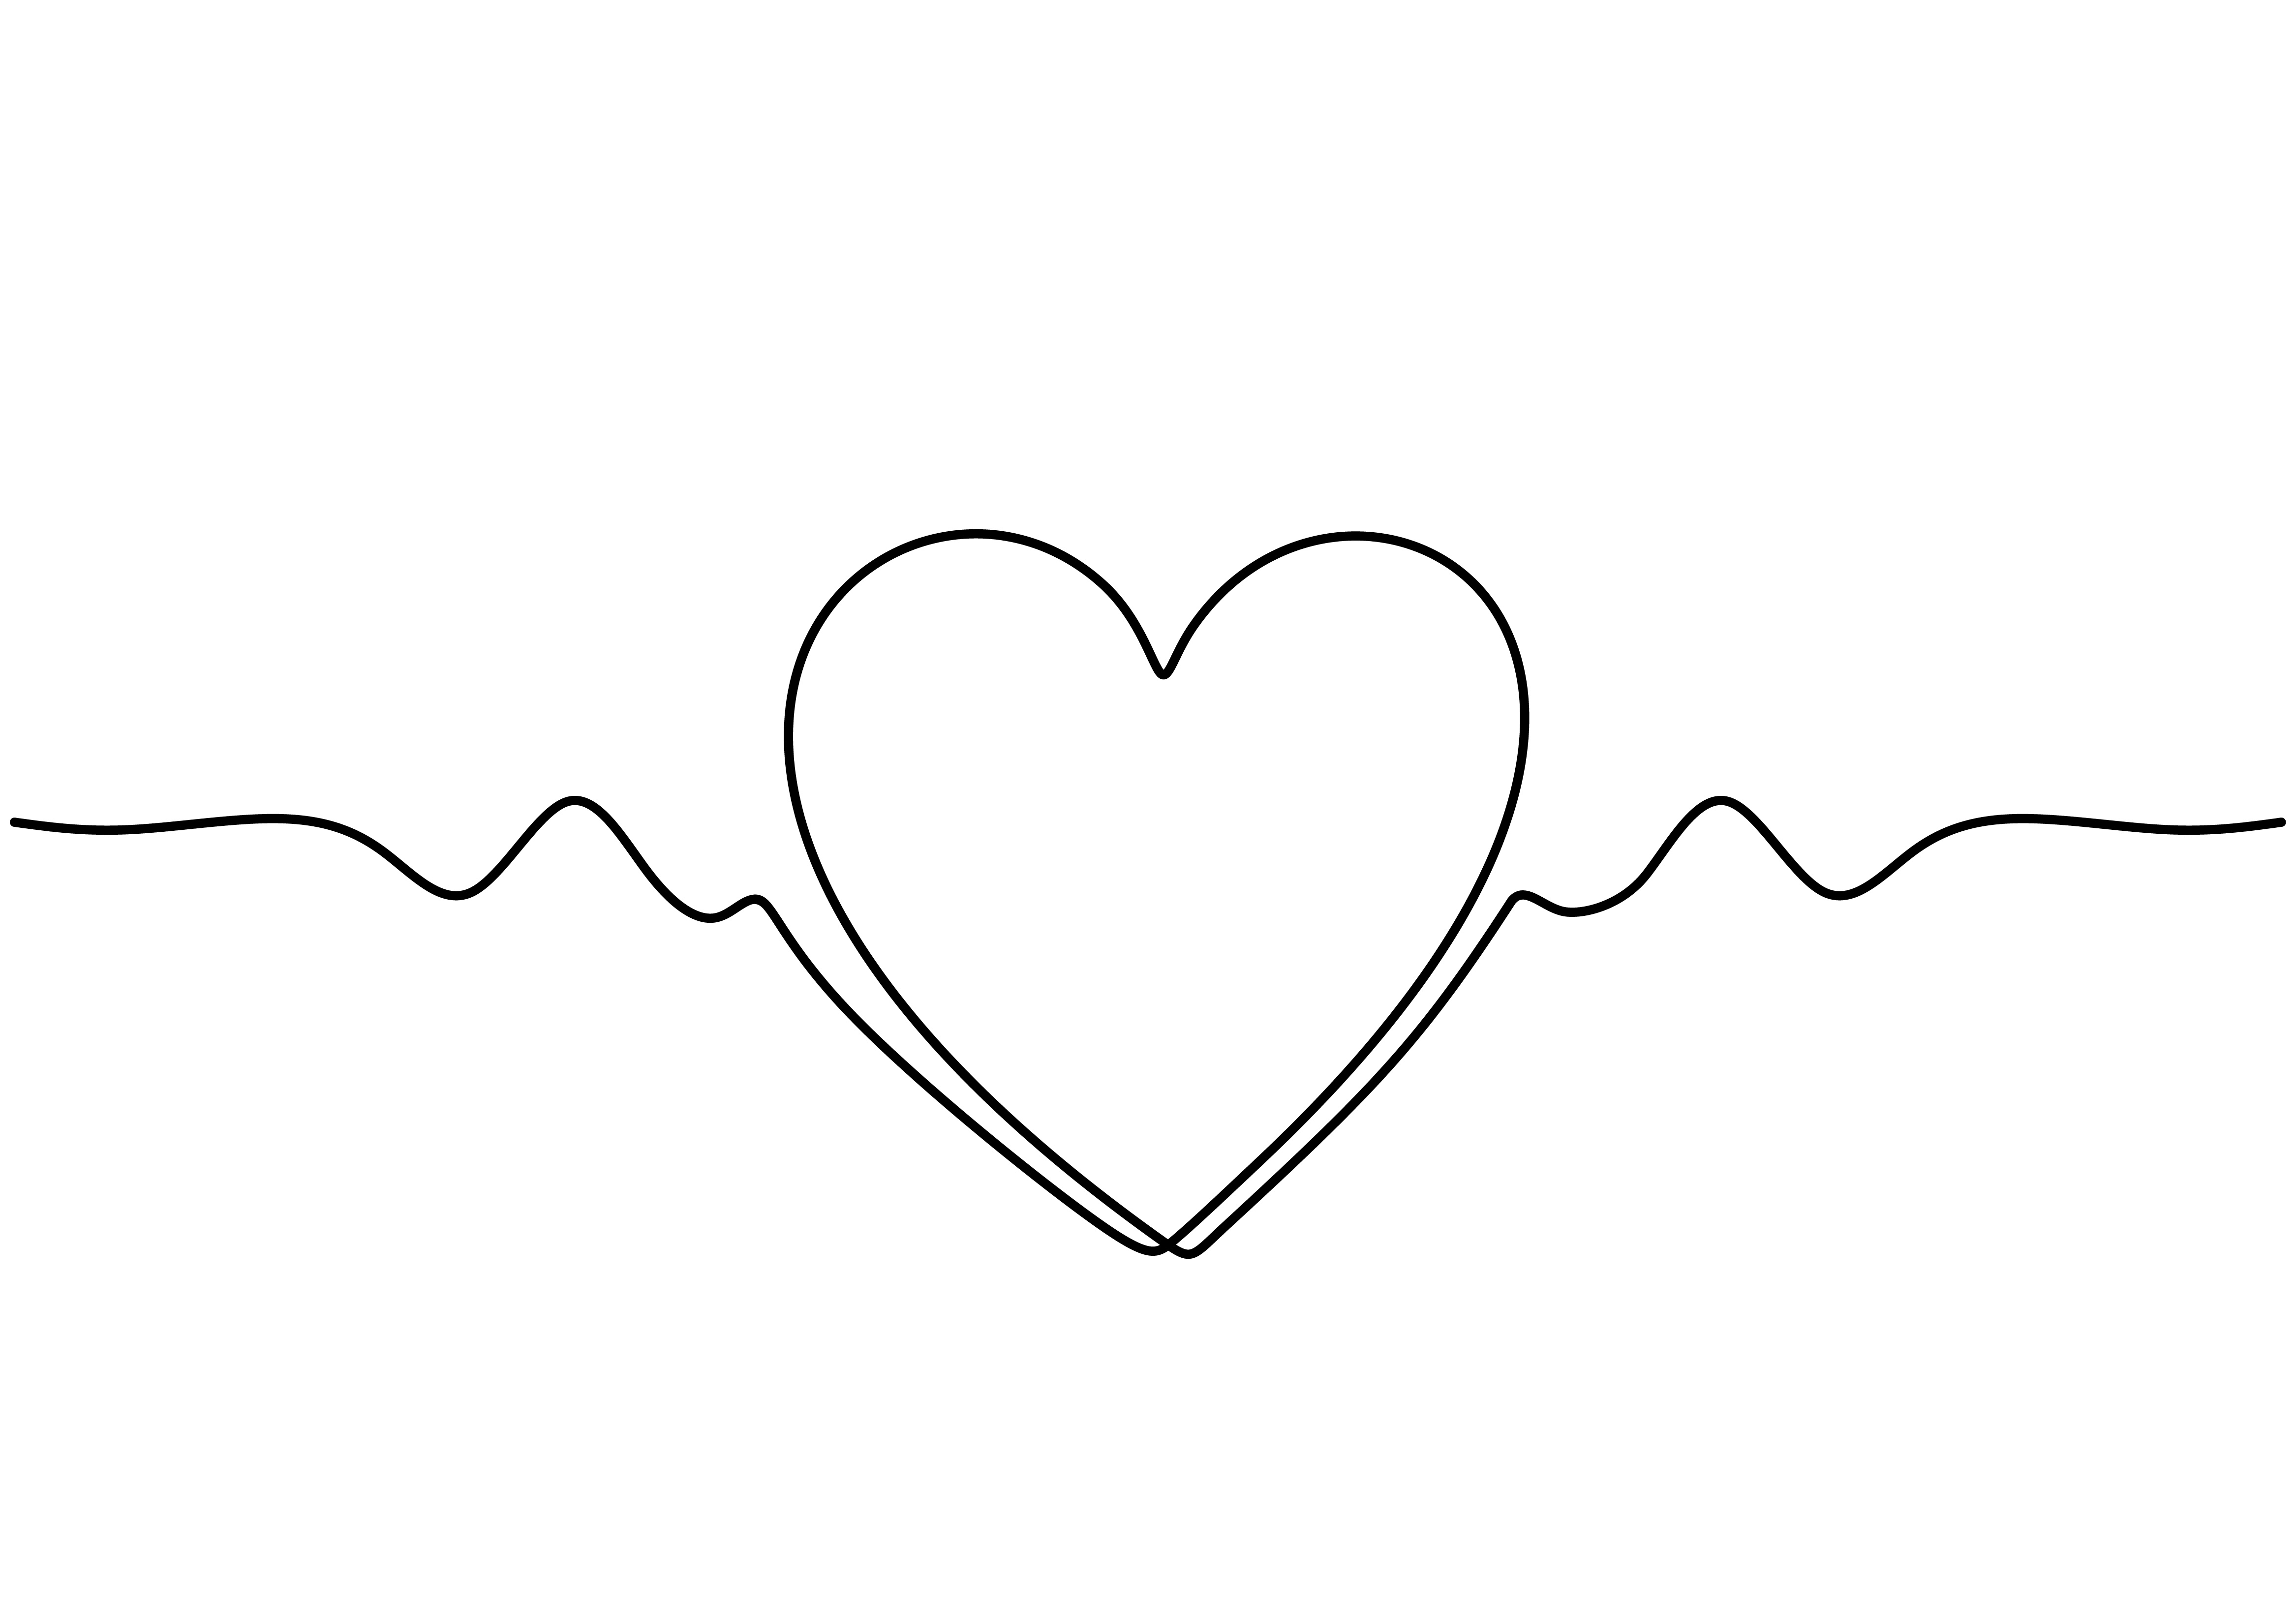 Cute heart one line drawing. Continuous hand drawn wave of love ...